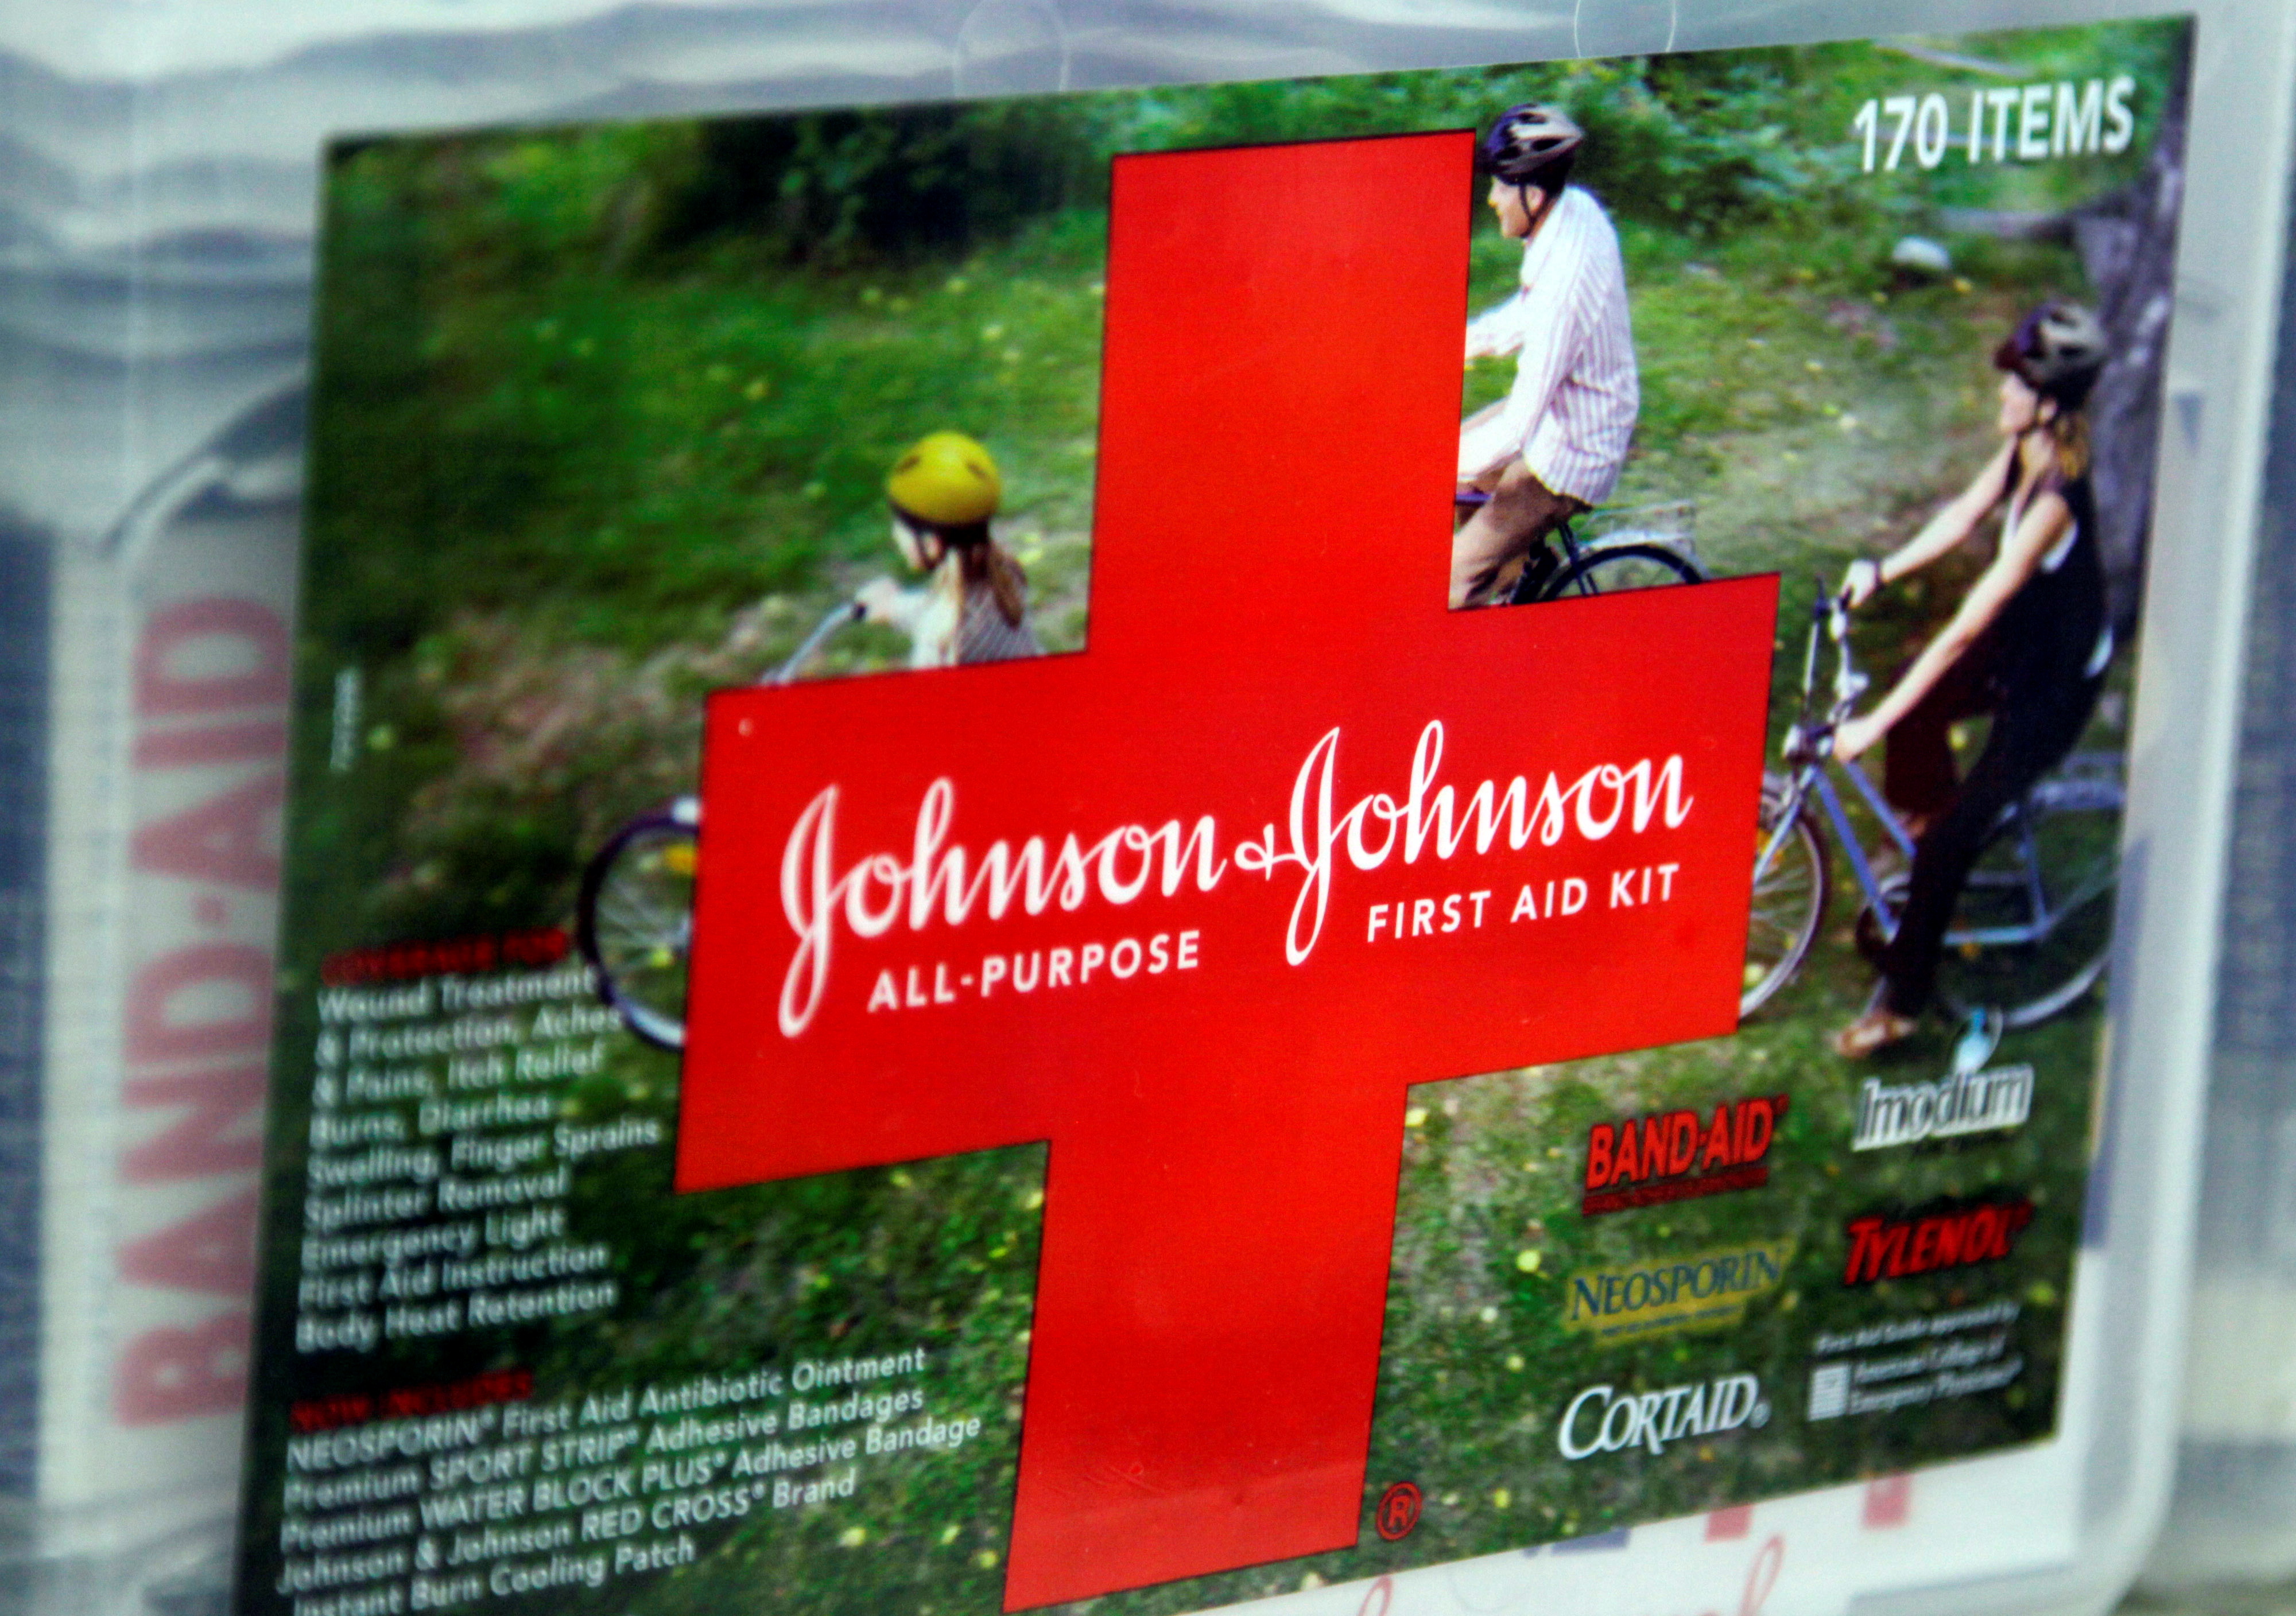 A first aid kit made by Johnson & Johnson for sale on a store shelf in Westminster, Colorado April 14, 2009.  REUTERS/Rick Wilking